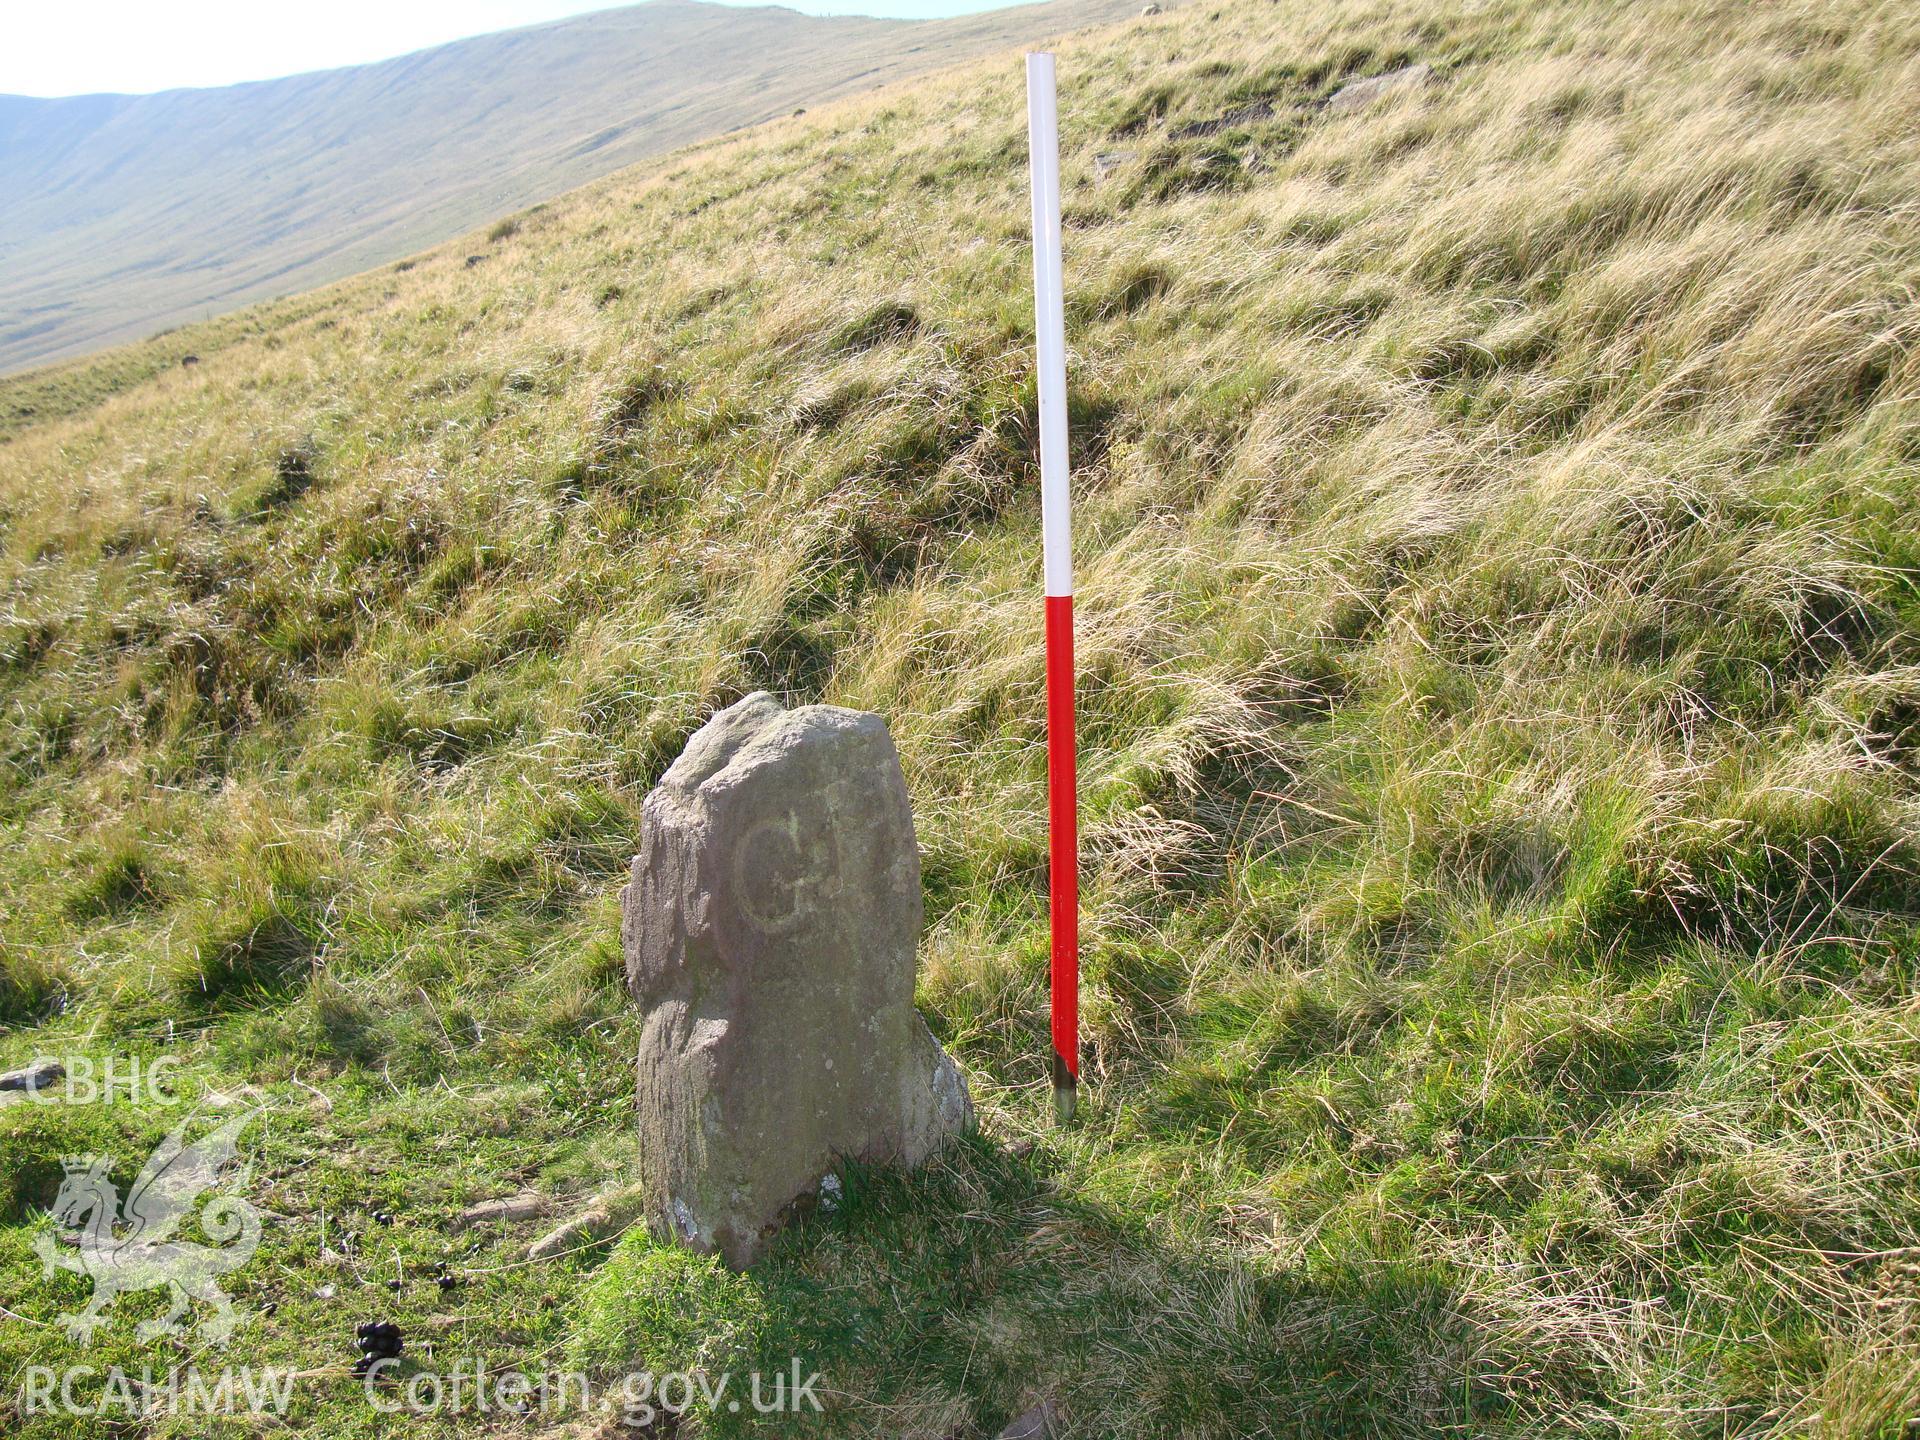 Digital colour photograph of Cwm Oergwm boundary stone taken on 12/10/2008 by R.P.Sambrook during the Brecon Beacons (east) Uplands Survey undertaken by Trysor.